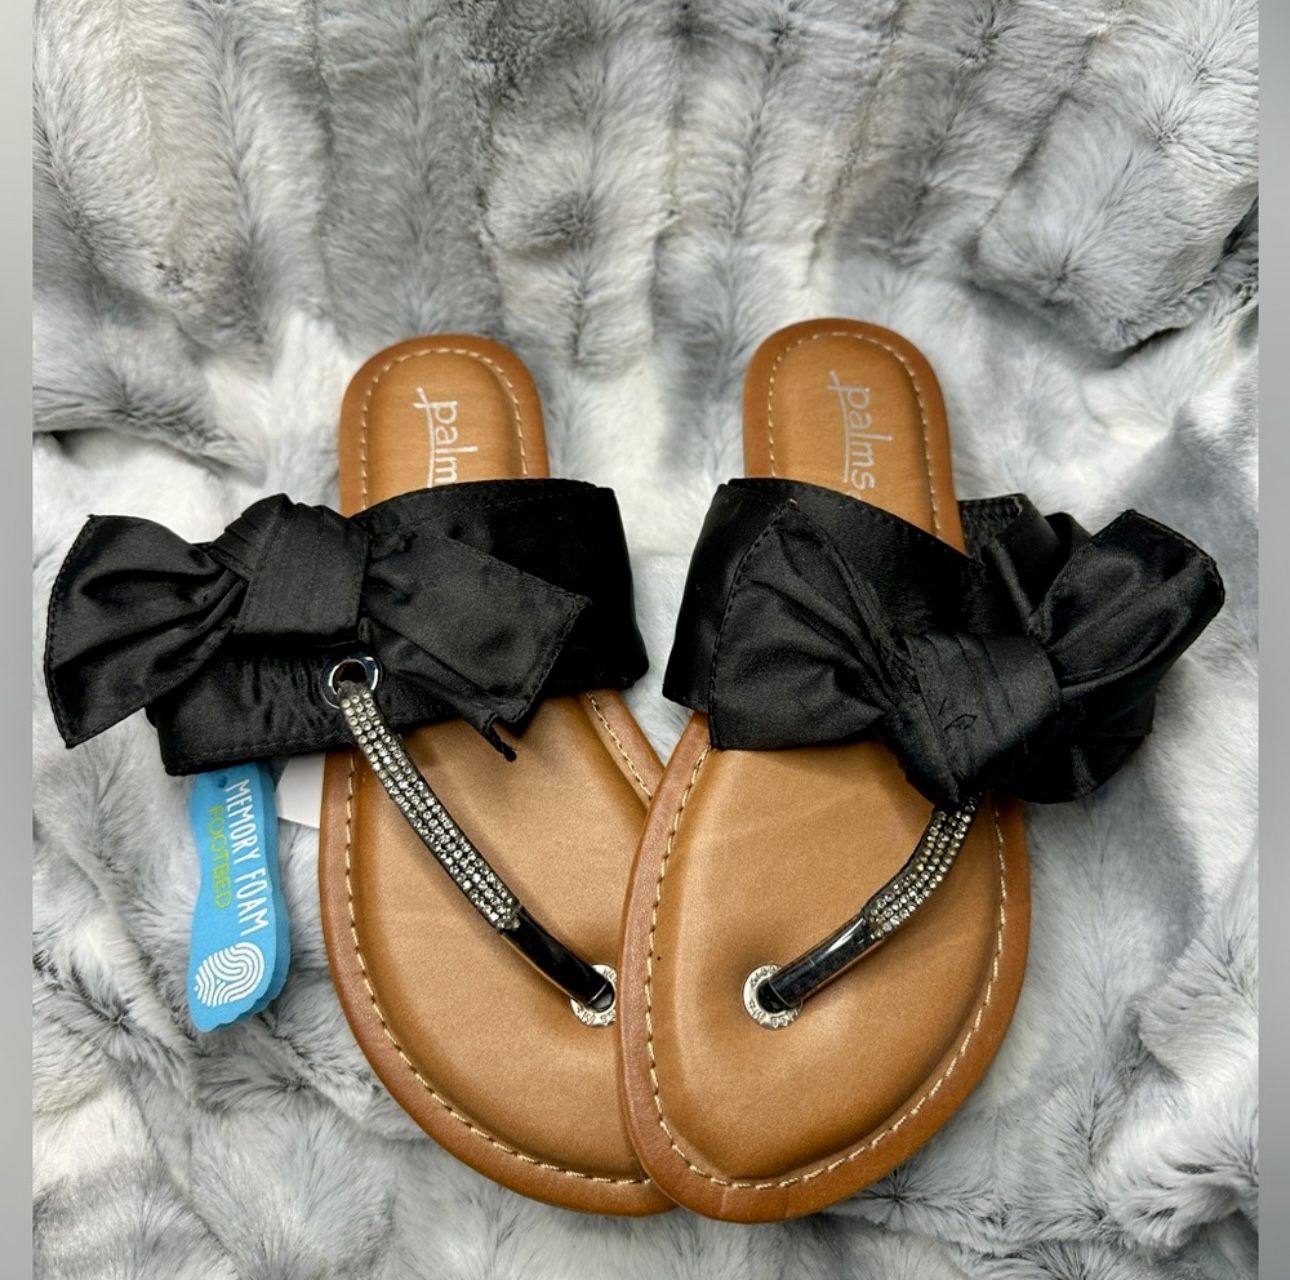 Palms Satin Bow & Bling Sandals ~ W/ Memory Foam Footbed! Size 6. Black.